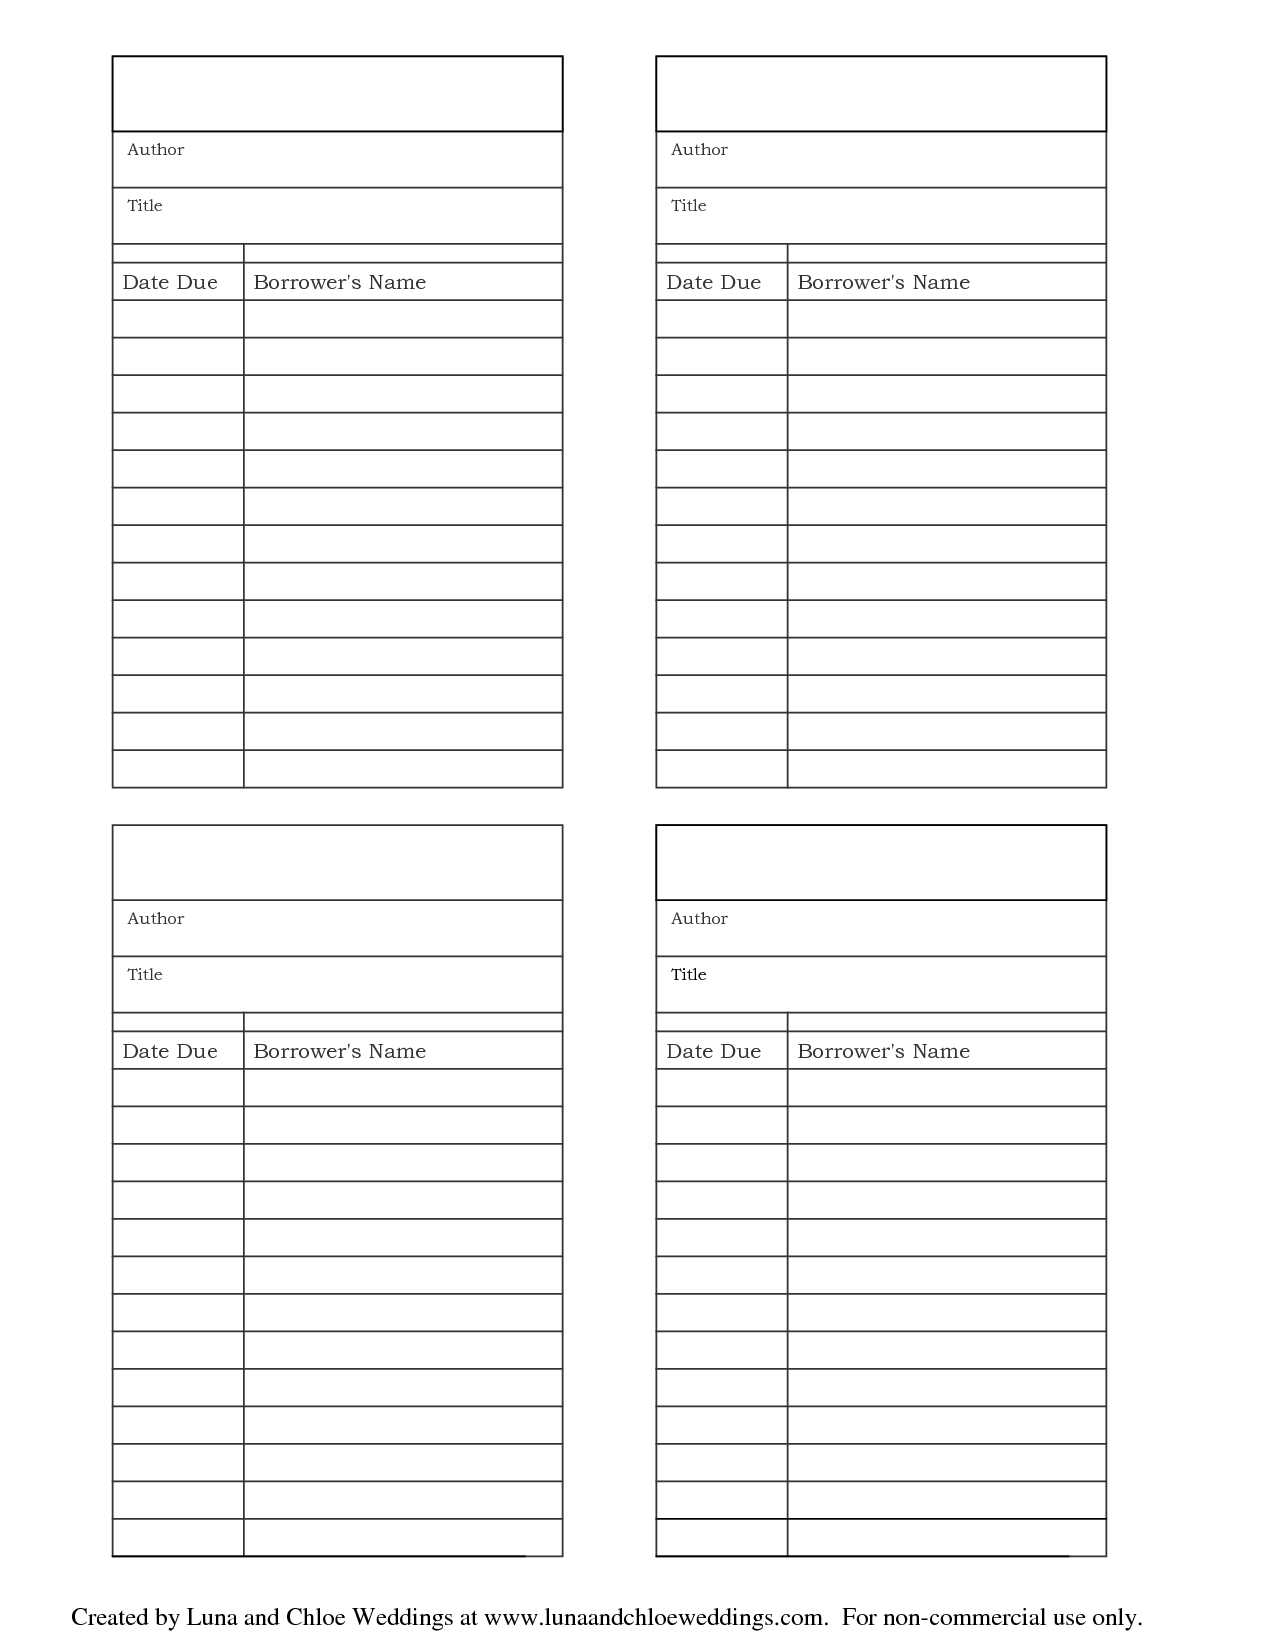 Library Checkout Card Template Printable – Cards Design Throughout Library Catalog Card Template